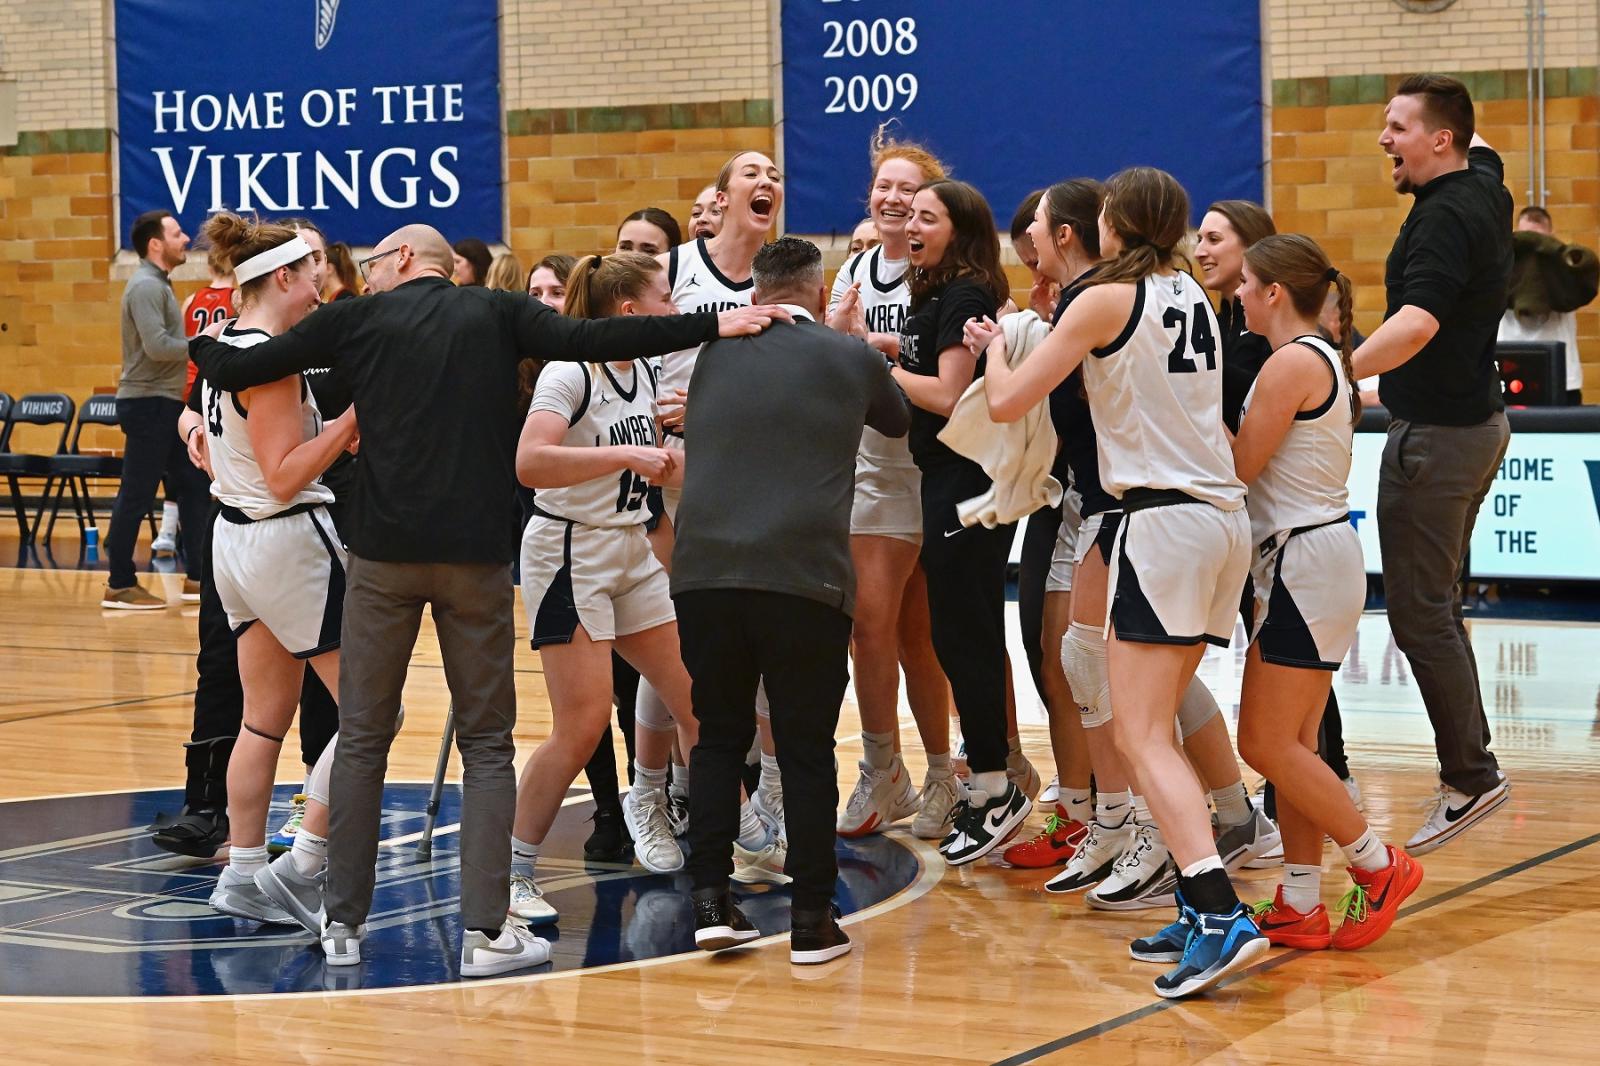 Players and coaches celebrate on the floor after the Vikings beat Ripon.